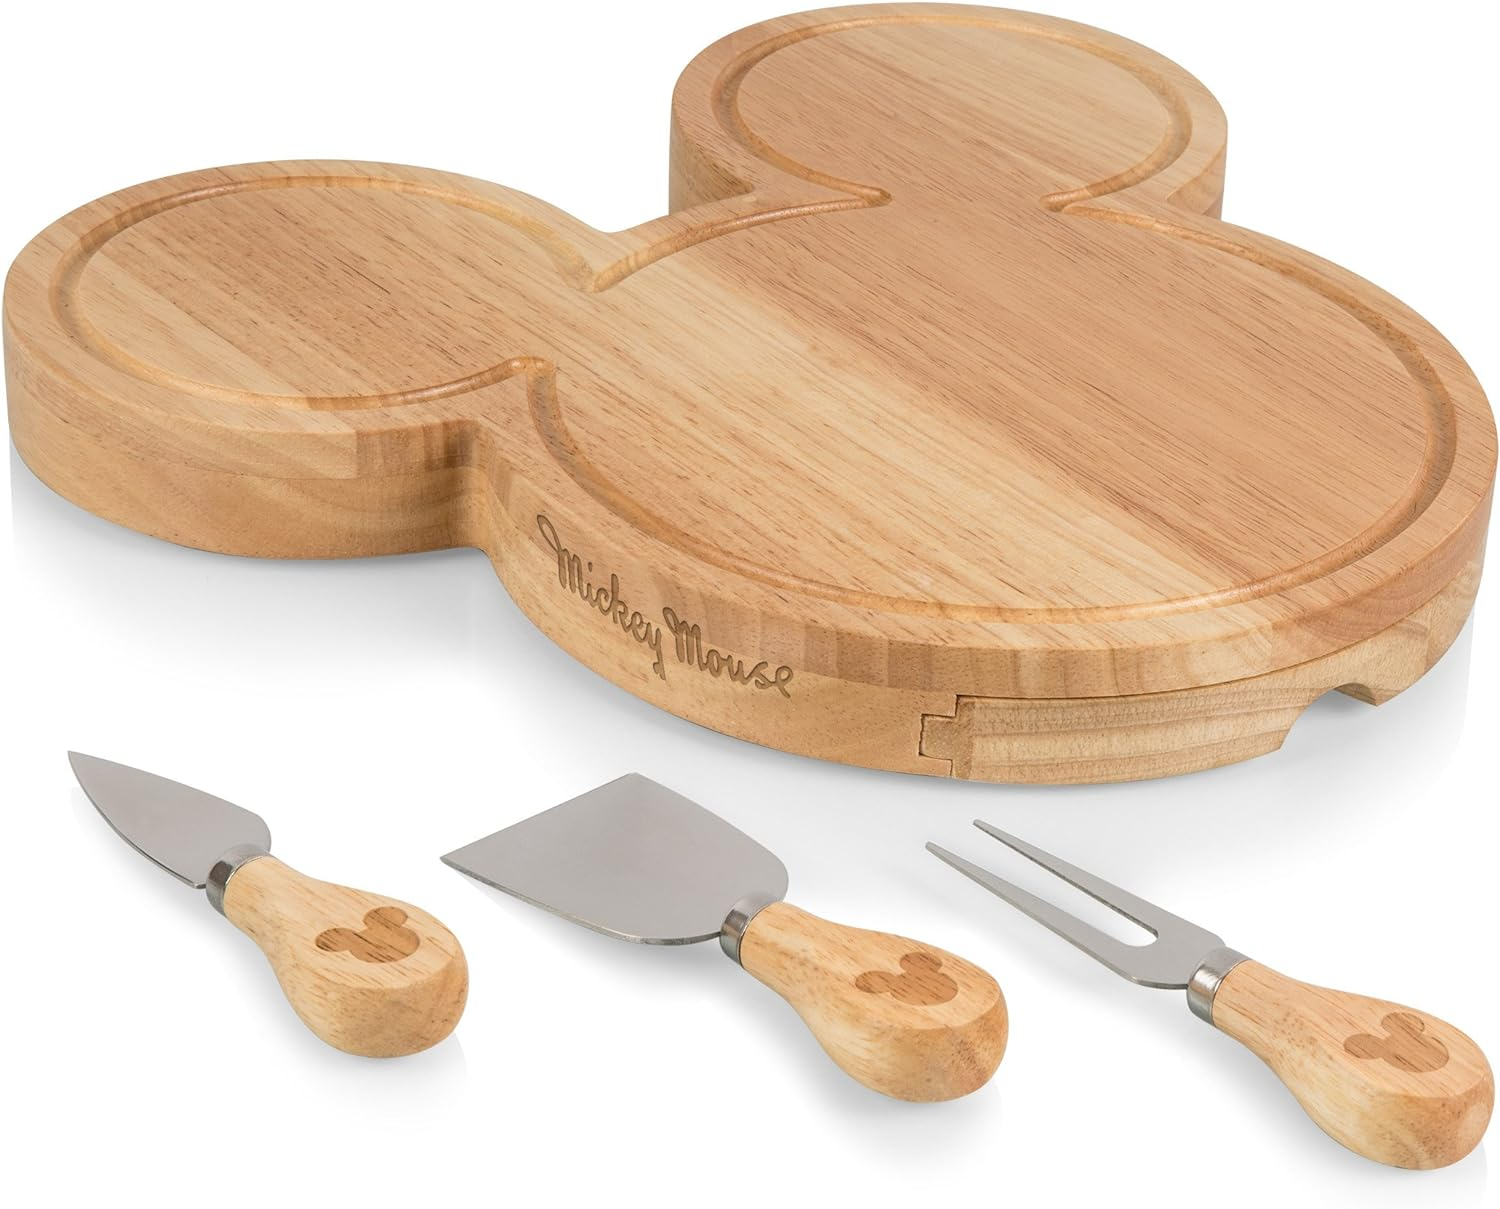 PICNIC TIME Disney Mickey Mouse Head Shaped Cheese Board and Knife Set, Charcuterie Board Set, Wood Cutting Board with Cheese Knives, (Parawood) 11.75 x 12.5 x 1.2 - Barbecue Whizz...Watch My Smoke!